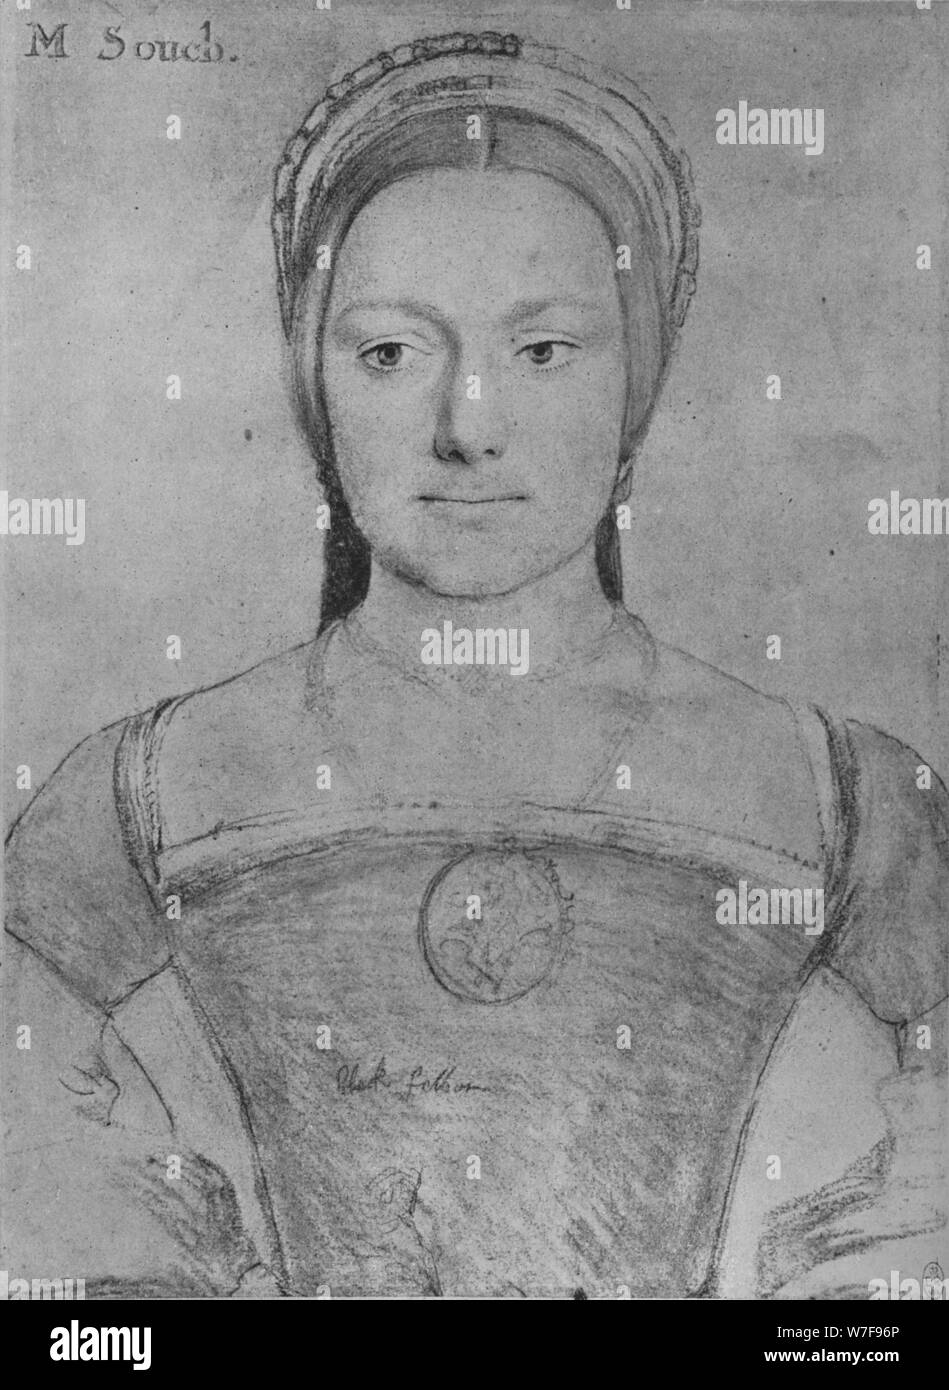 'Mary Zouch', c1532-1543 (1945). Artista: Hans Holbein il Giovane. Foto Stock